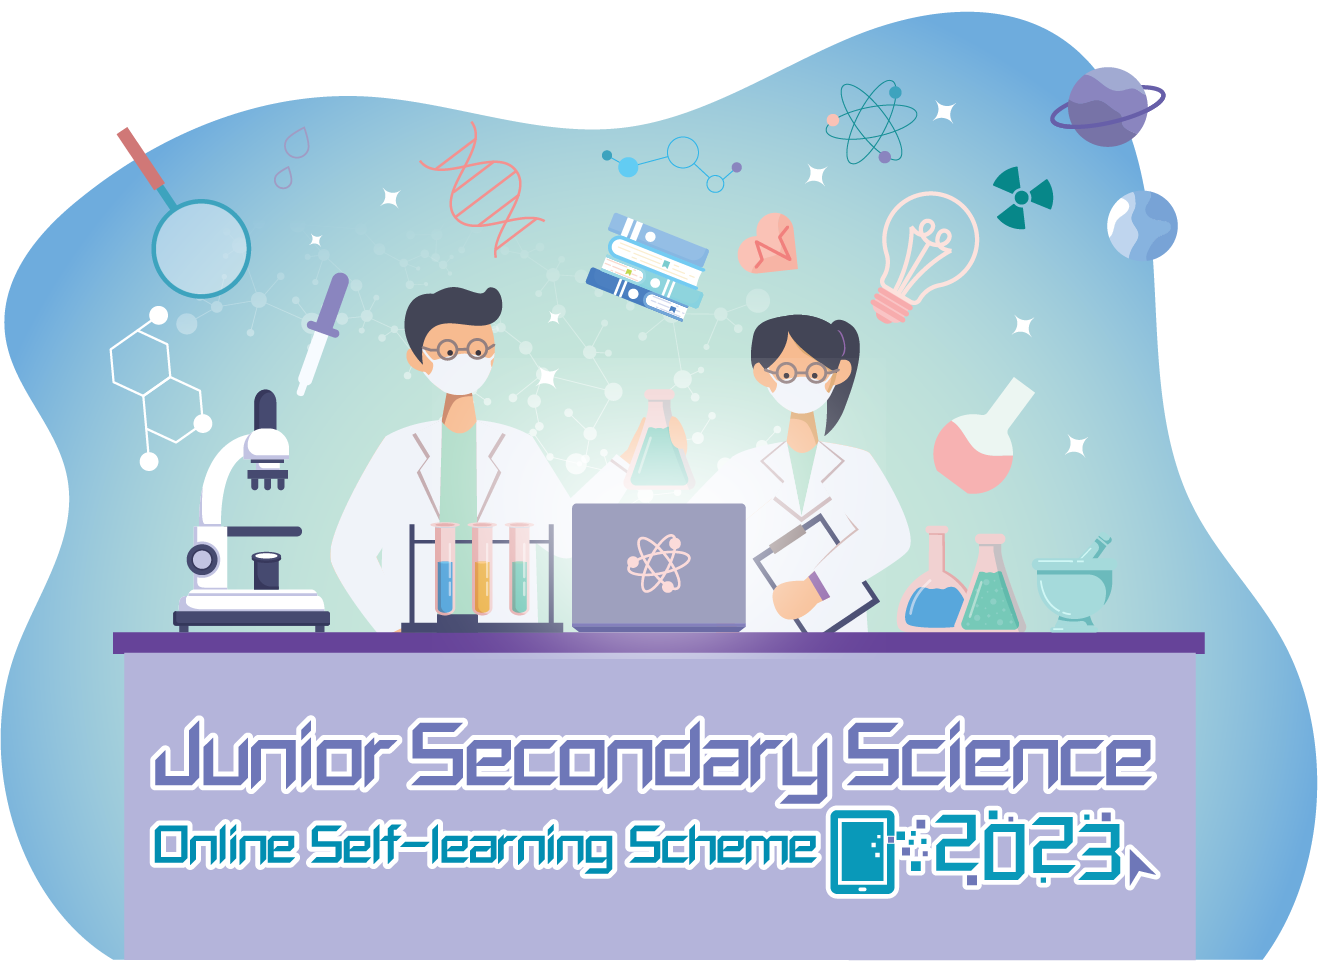 Junior Secondary Science Online Self-learning Scheme